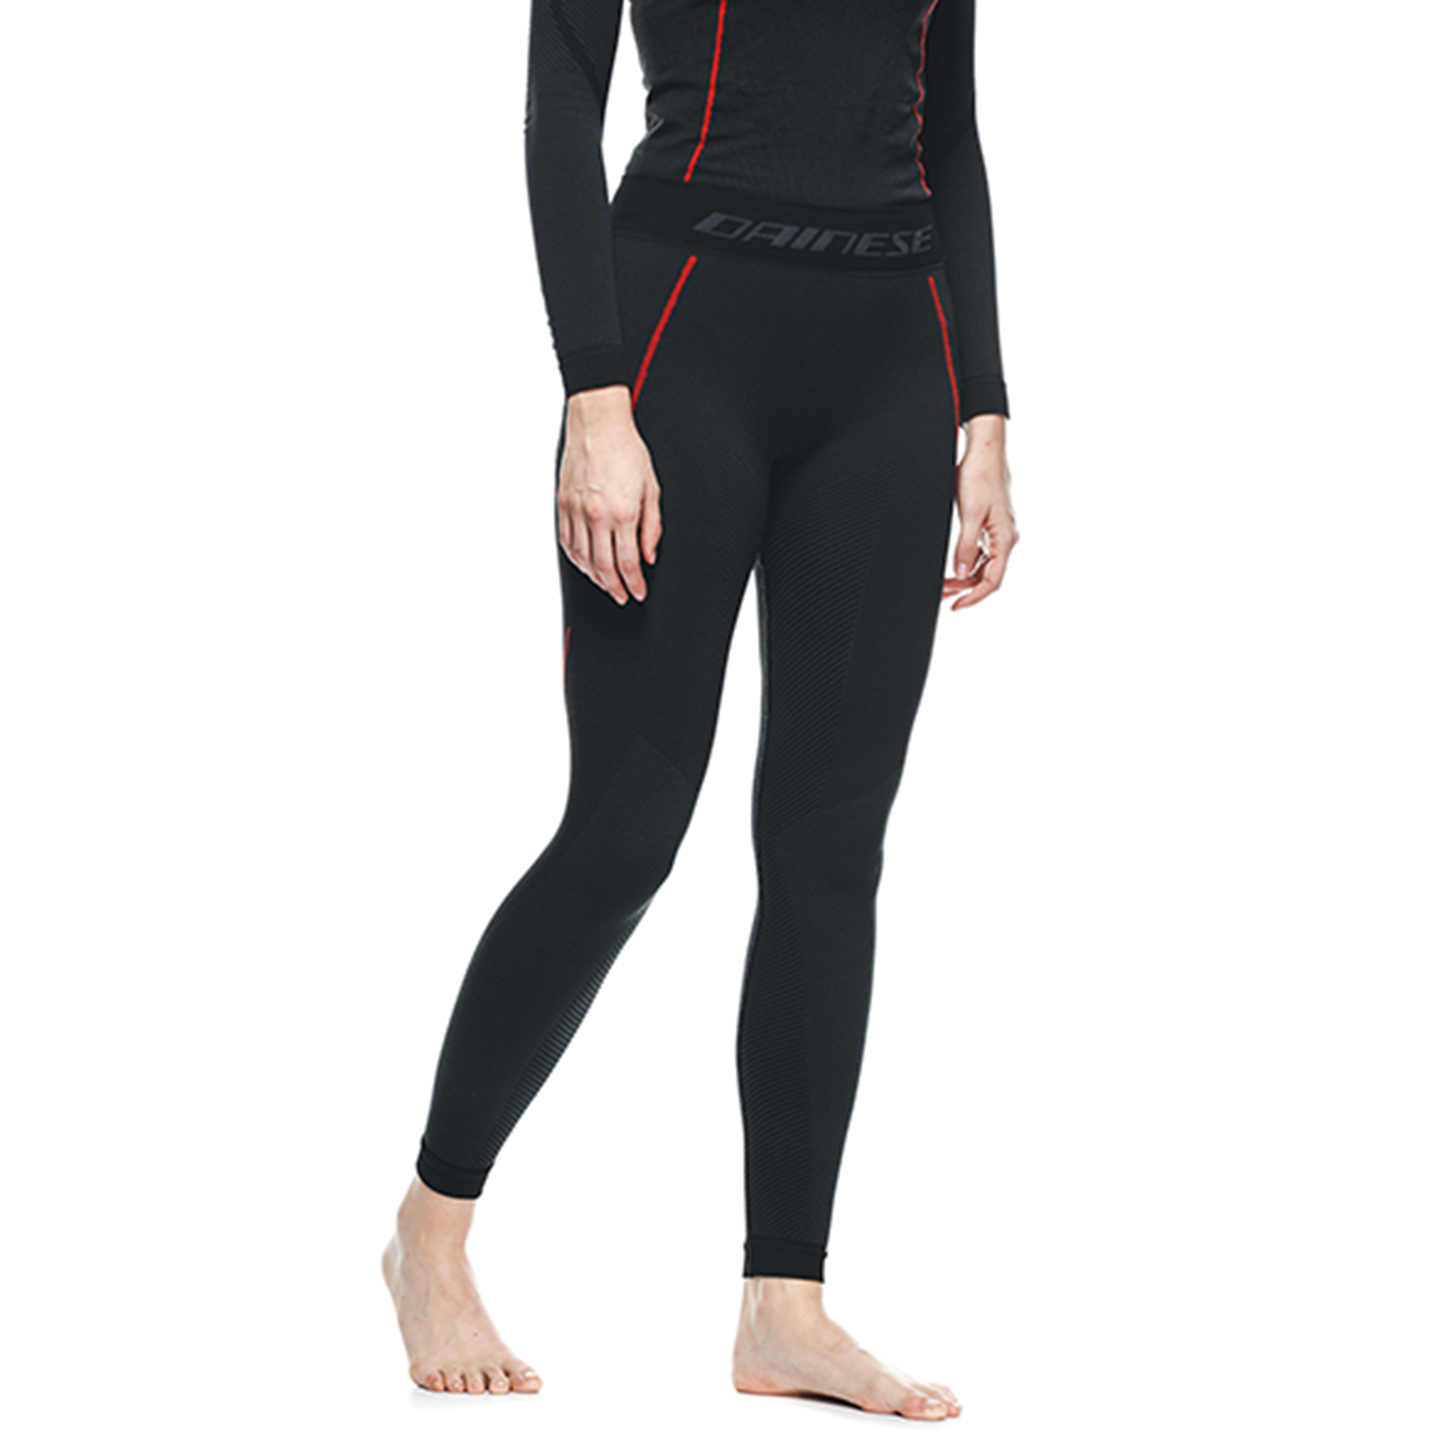 Dainese Thermo Pants Lady - Black/Red (606)